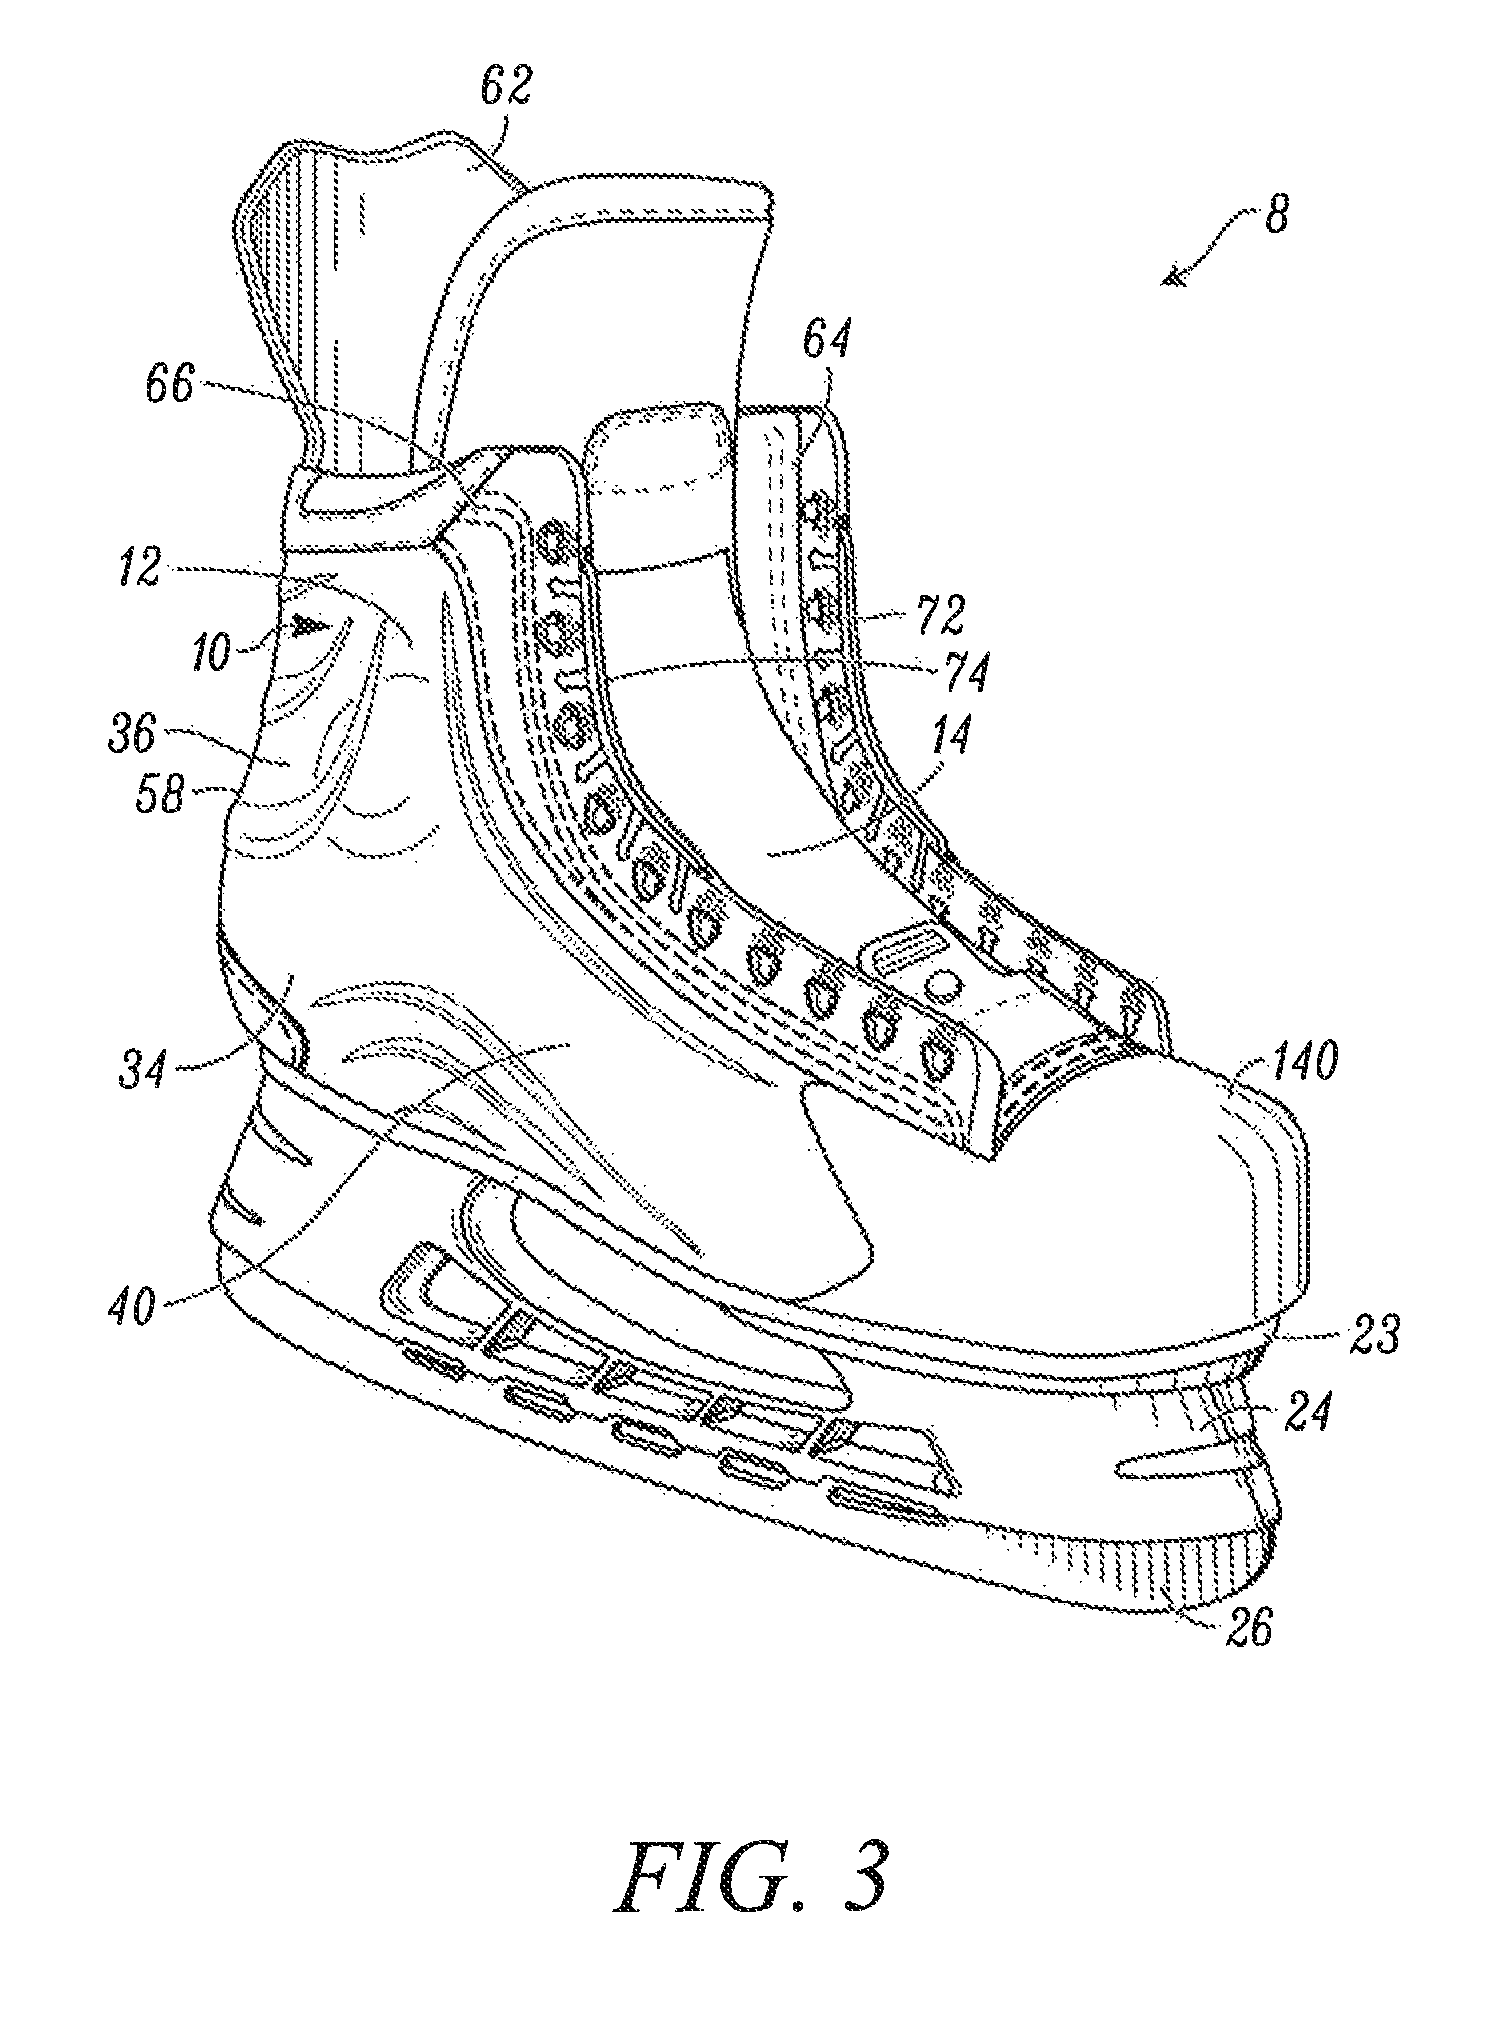 Skate boot having a toe cap with rear extensions